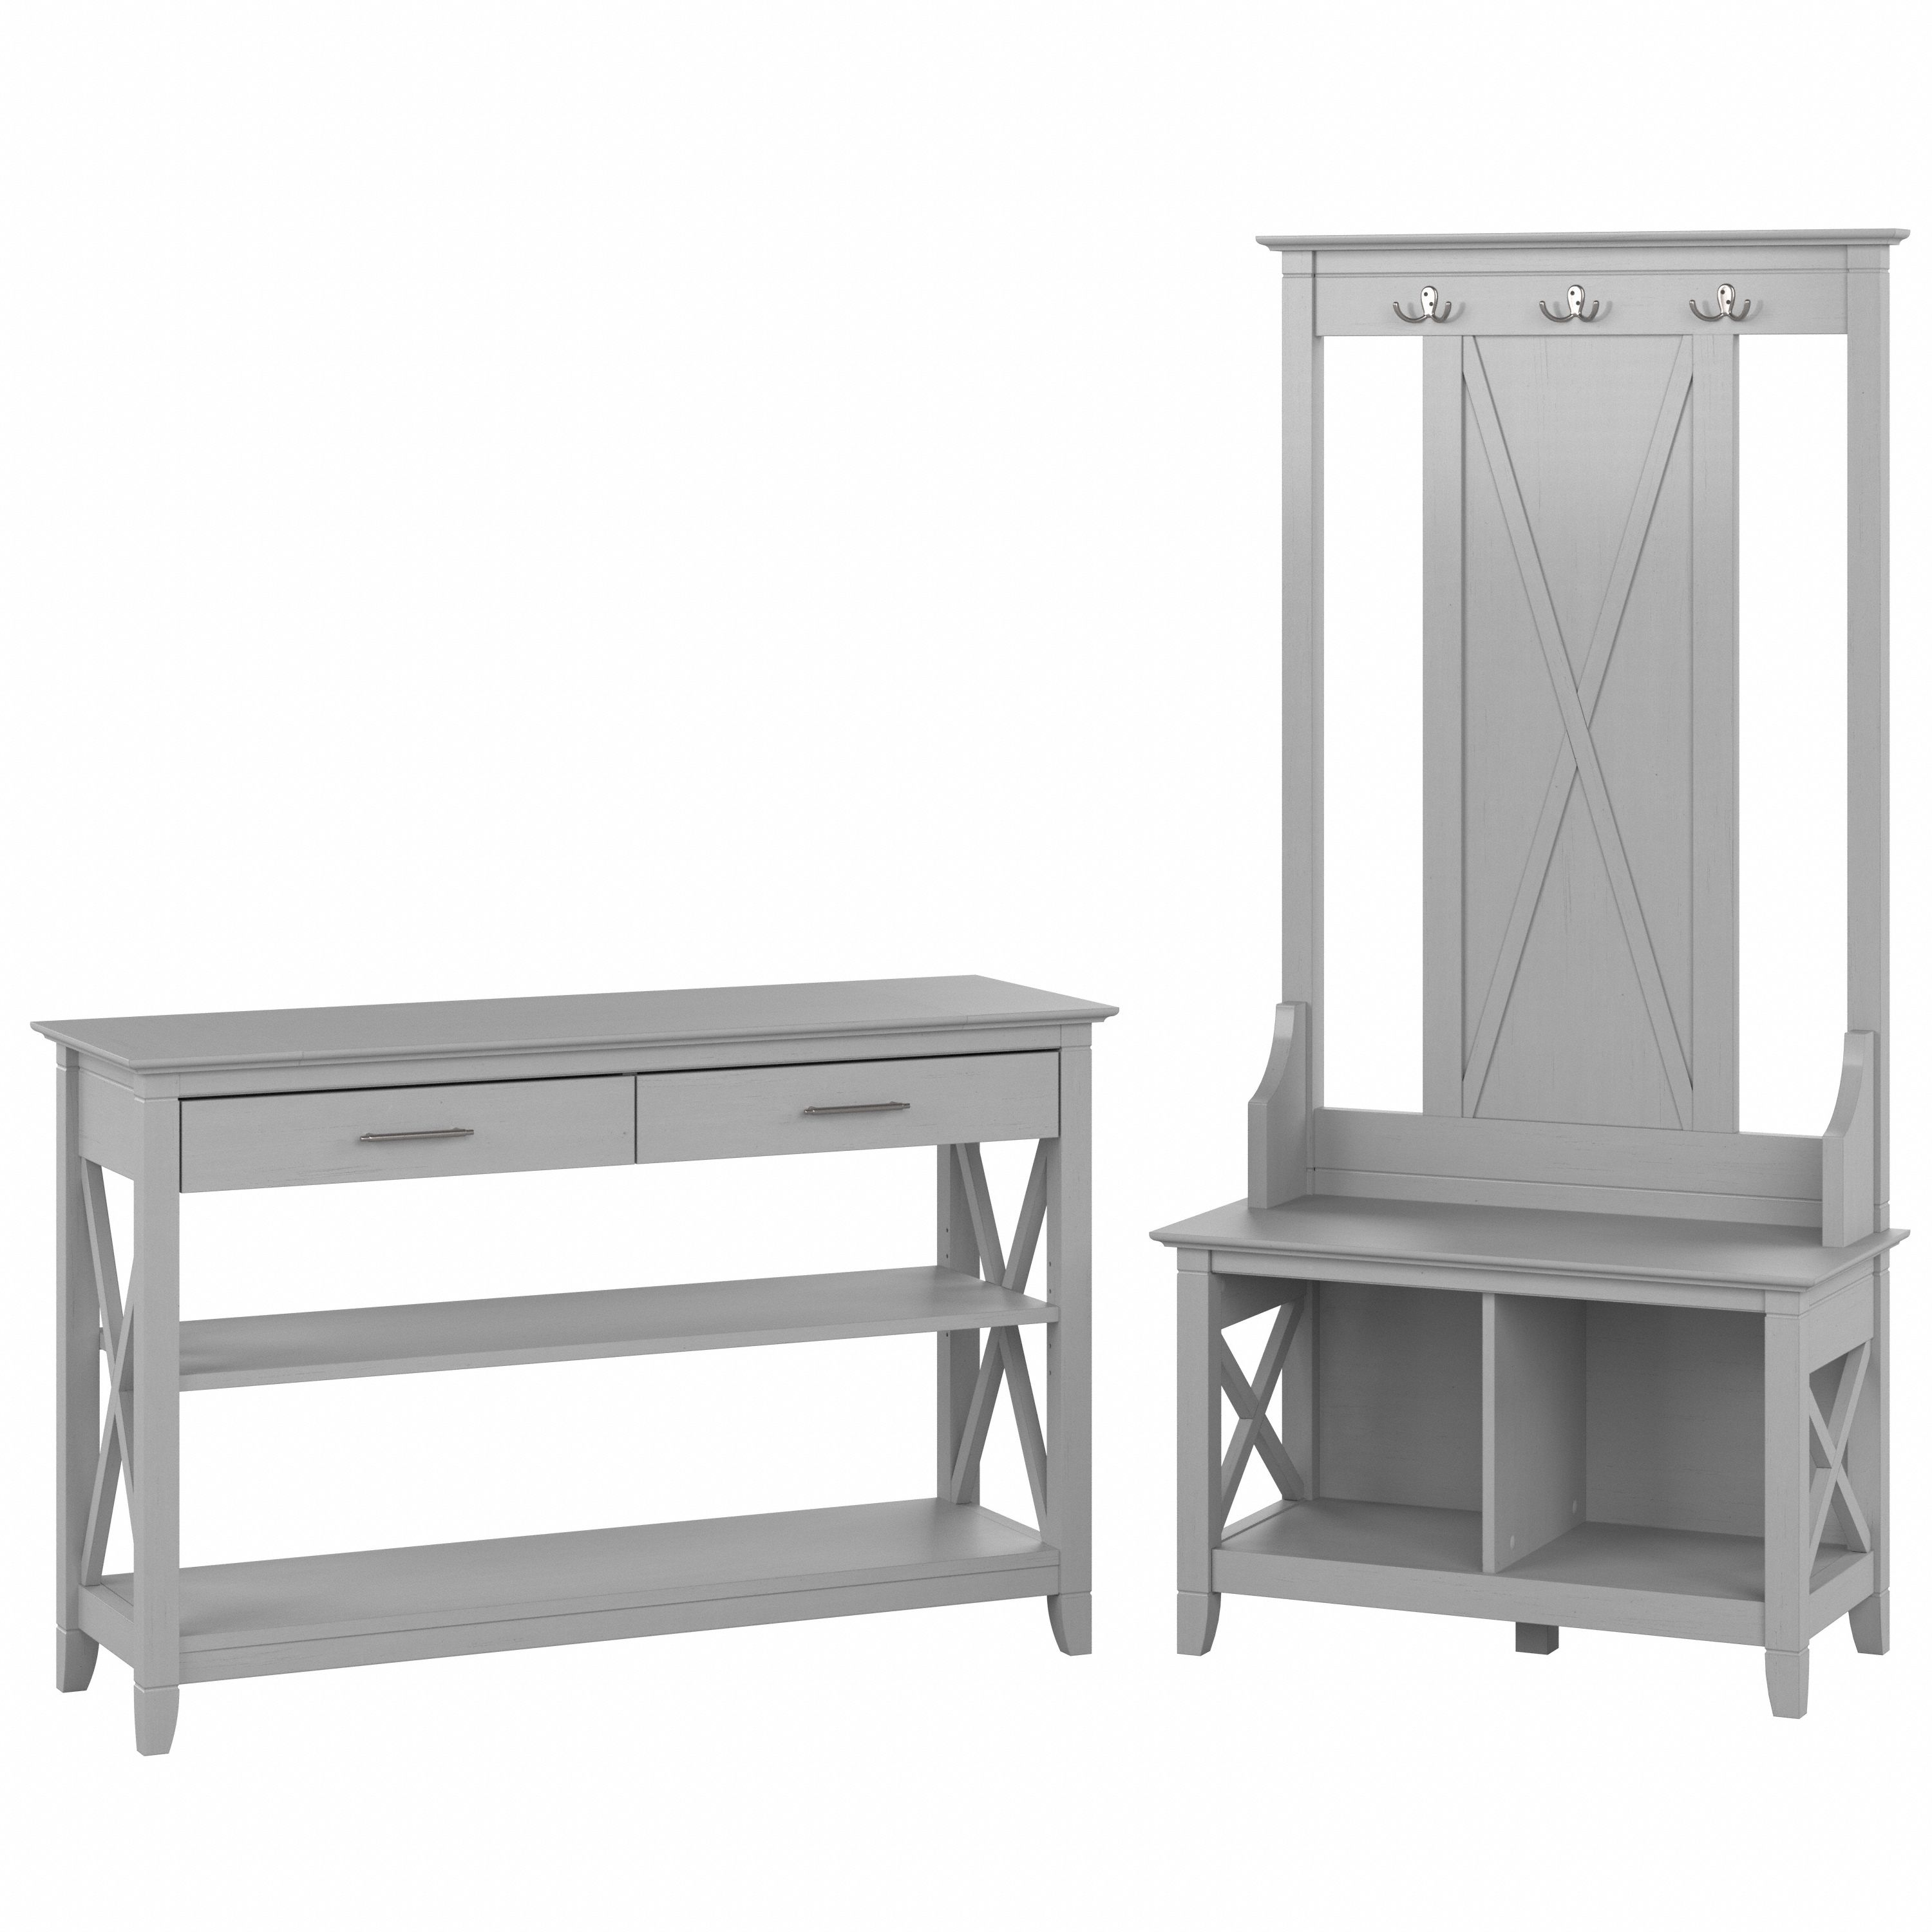 Shop Bush Furniture Key West Entryway Storage Set with Hall Tree, Shoe Bench and Console Table 02 KWS056CG #color_cape cod gray